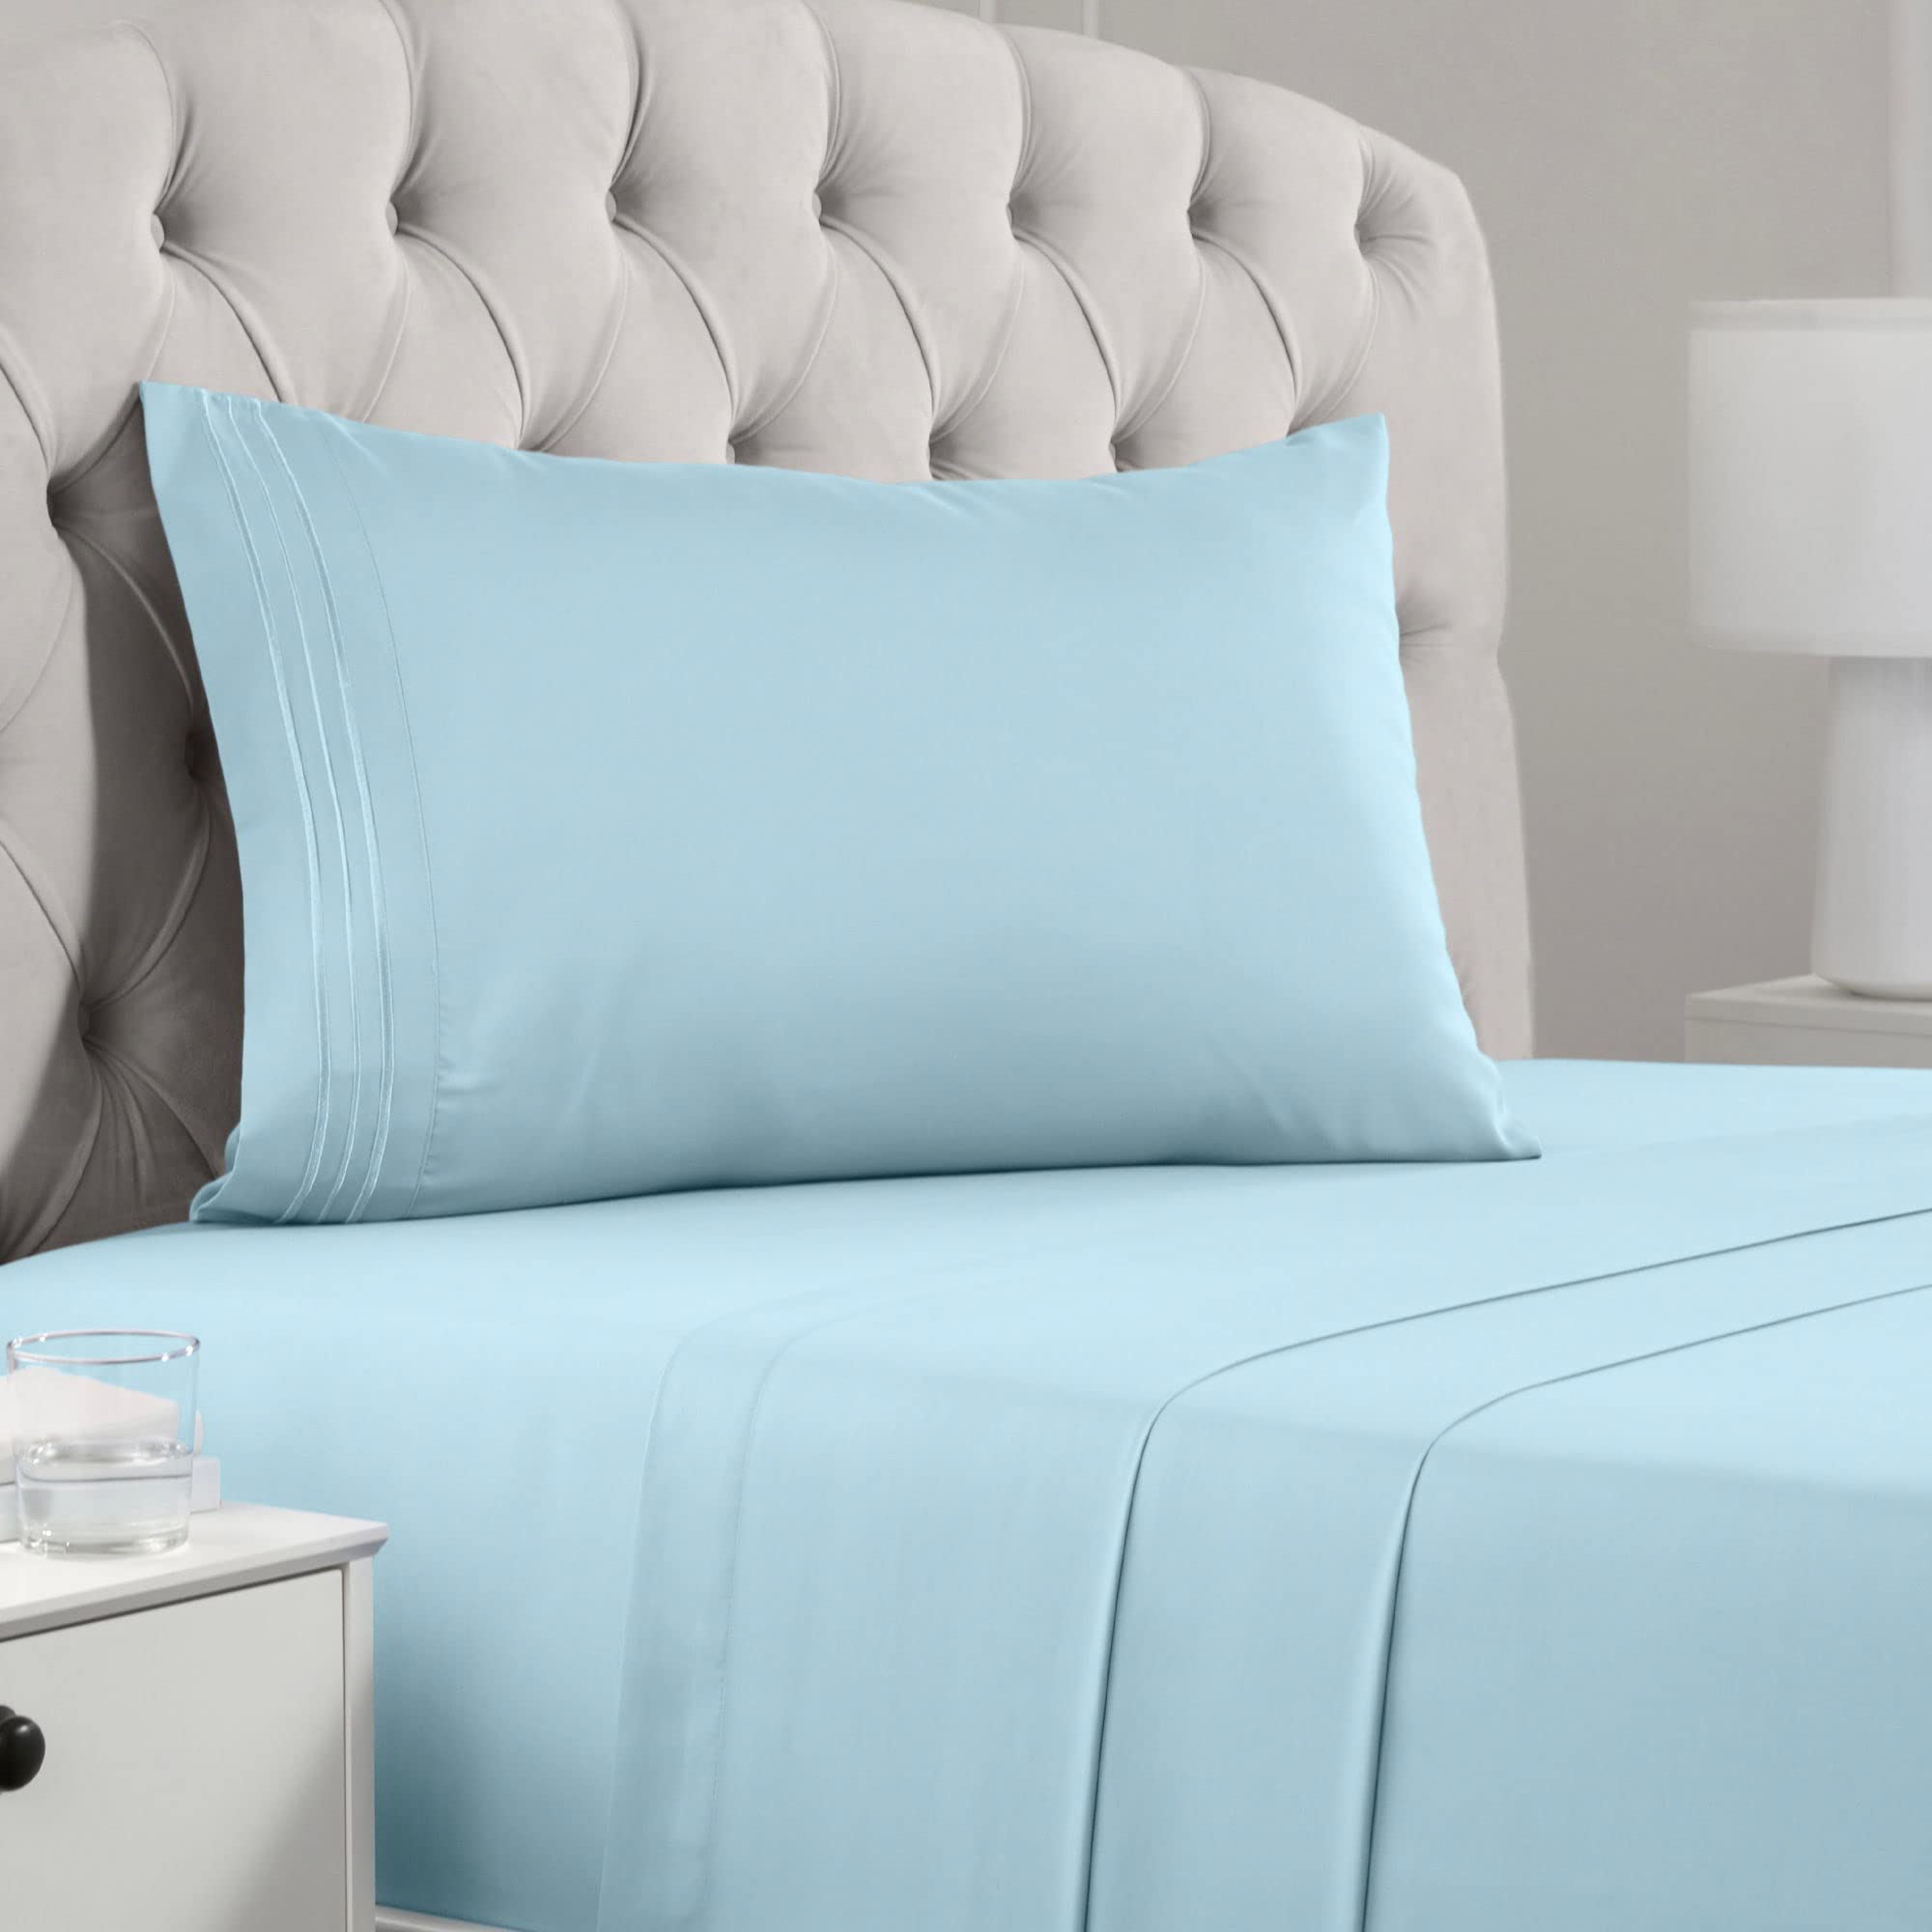 Book Cover Mellanni Twin Sheet Set - 3 Piece Iconic Collection Bedding Sheets & Pillowcases - Luxury, Extra Soft, Cooling Bed Sheets - Deep Pocket up to 16 inch - Wrinkle, Fade, Stain Resistant (Twin, Baby Blue) Twin Baby Blue